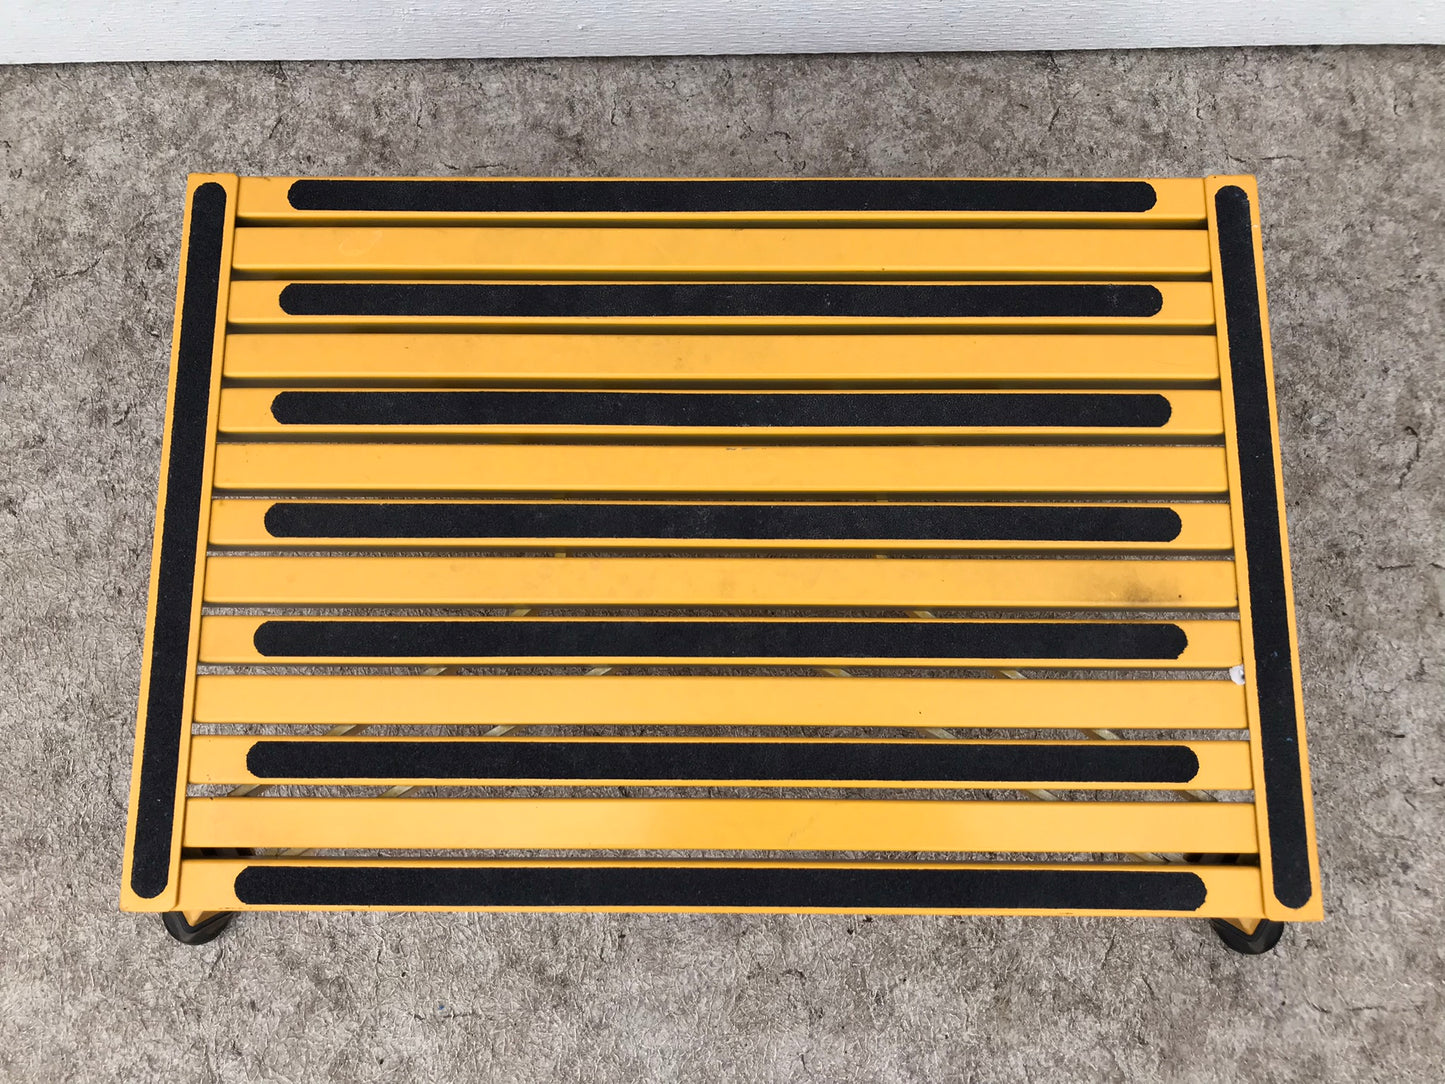 Camping Work Safety Step XL-08C-Y Yellow X-Large Folding Recreational RV Trailer Step Stool Holds 1000 Pounds Folding Non Slip 19 x 15 x 8 Inch Paid $249.99 AS NEW